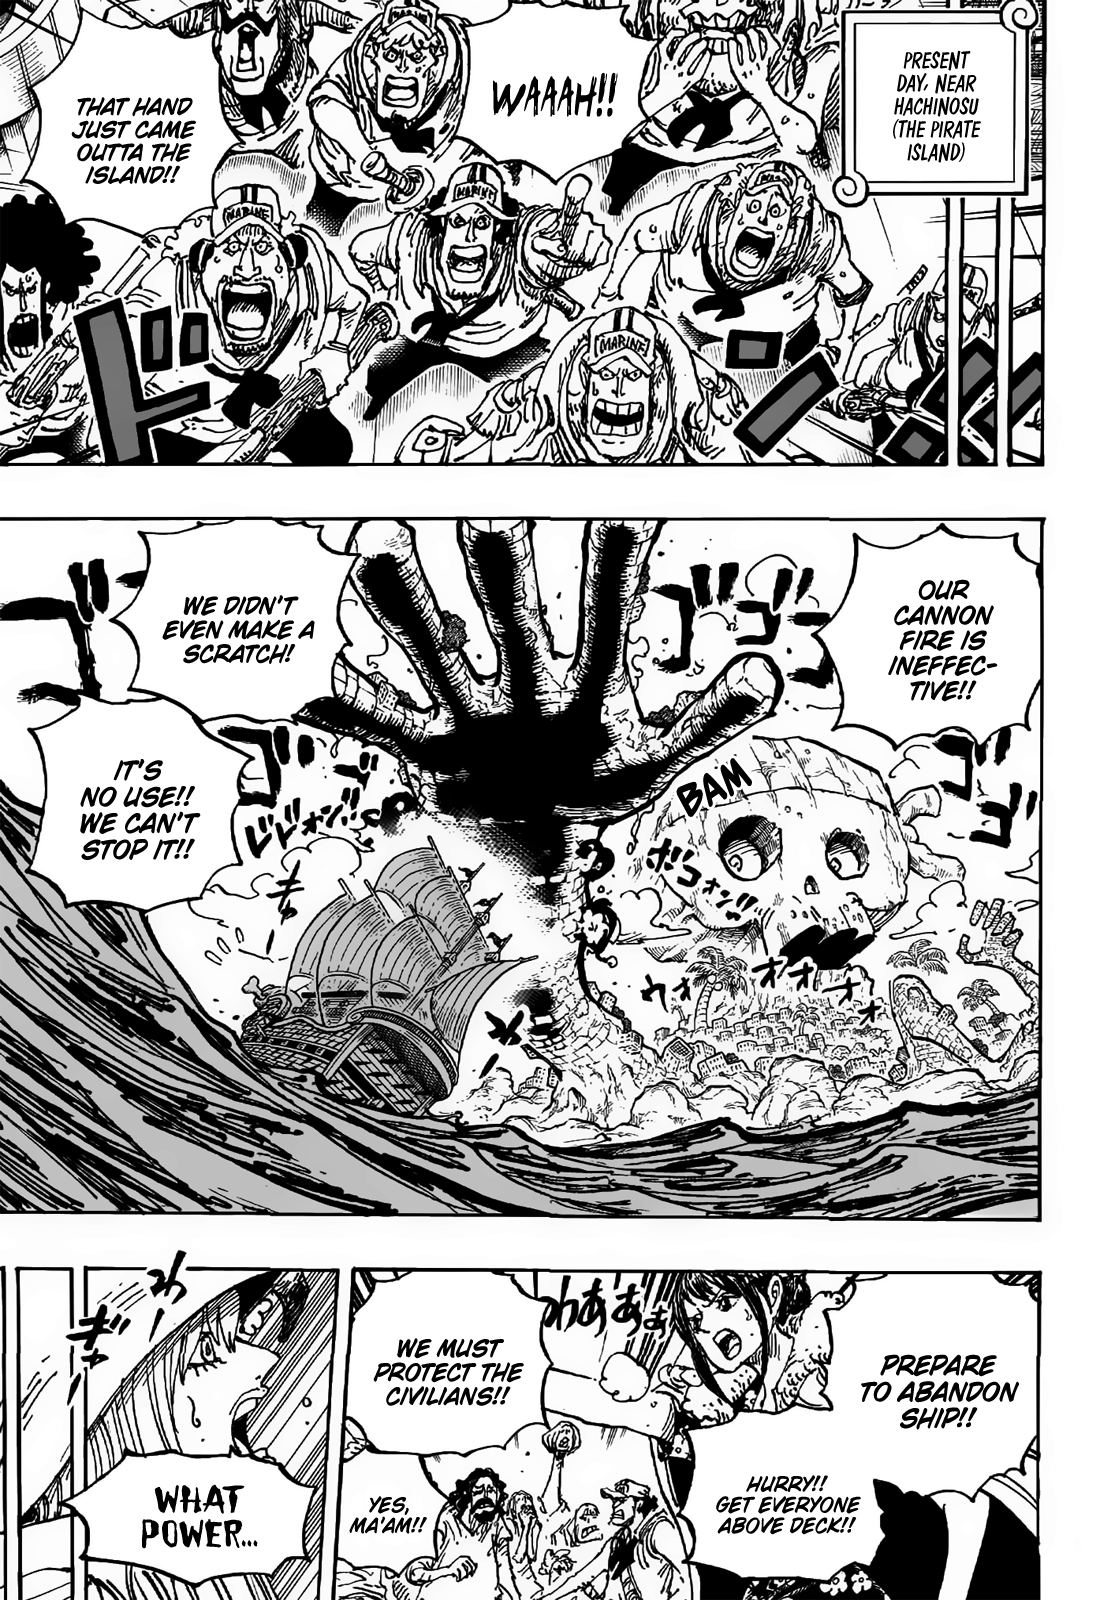 Spoiler - One Piece Chapter 1021 Spoilers Discussion